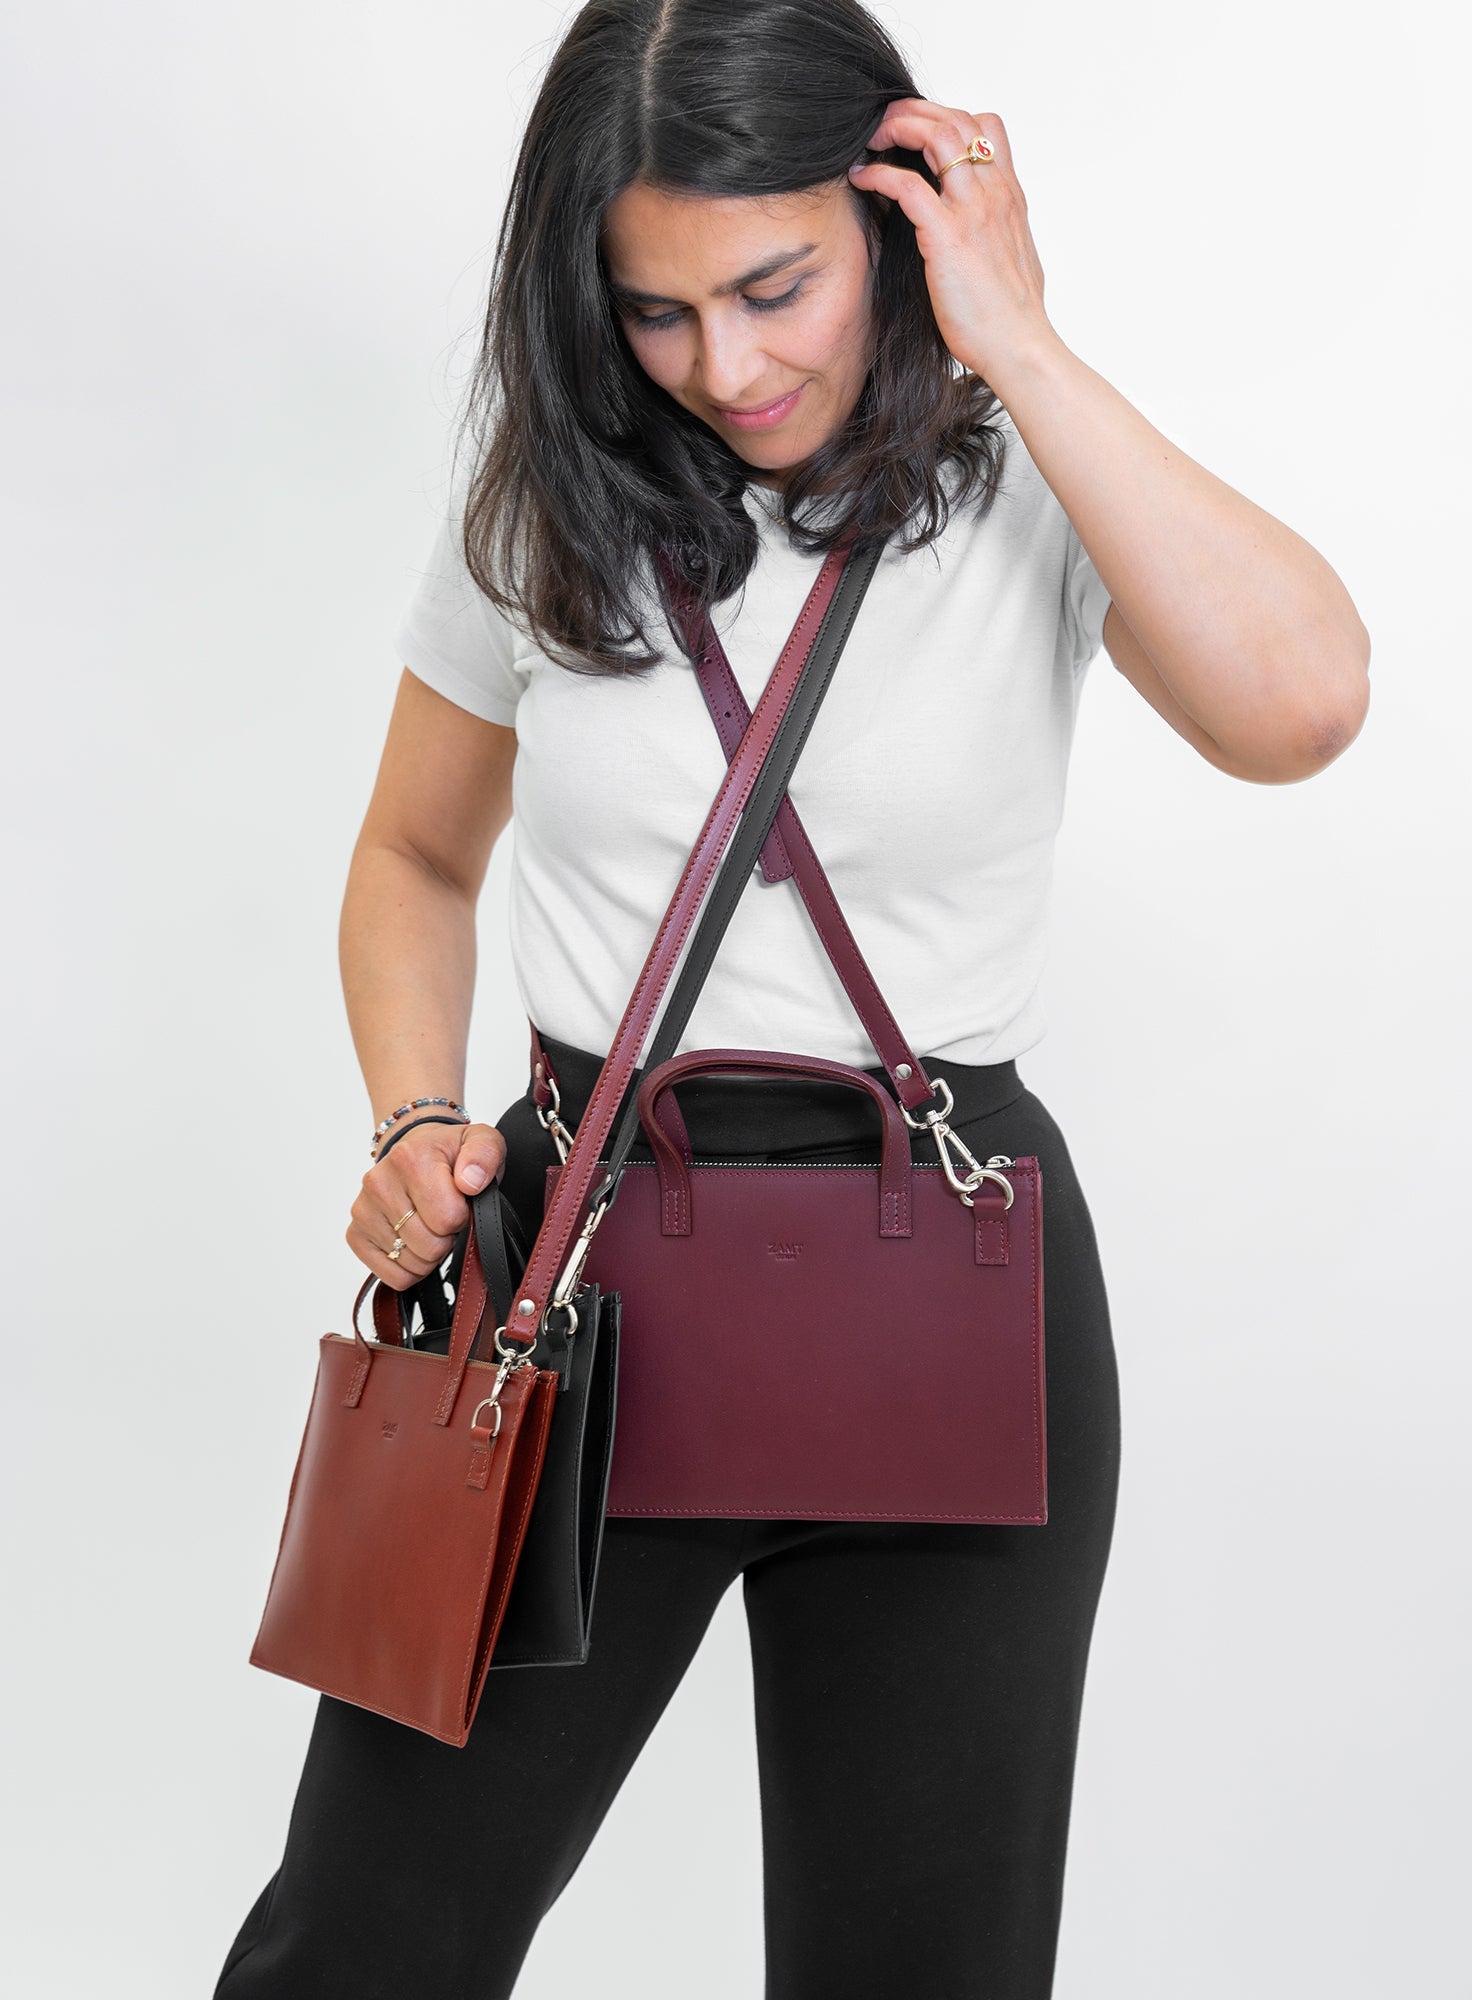 CROSSBODY_POUCH_LEYAN_BORDEAUX_Designed_in_Berlin_Made_to_last_Handmade_in_Poland.